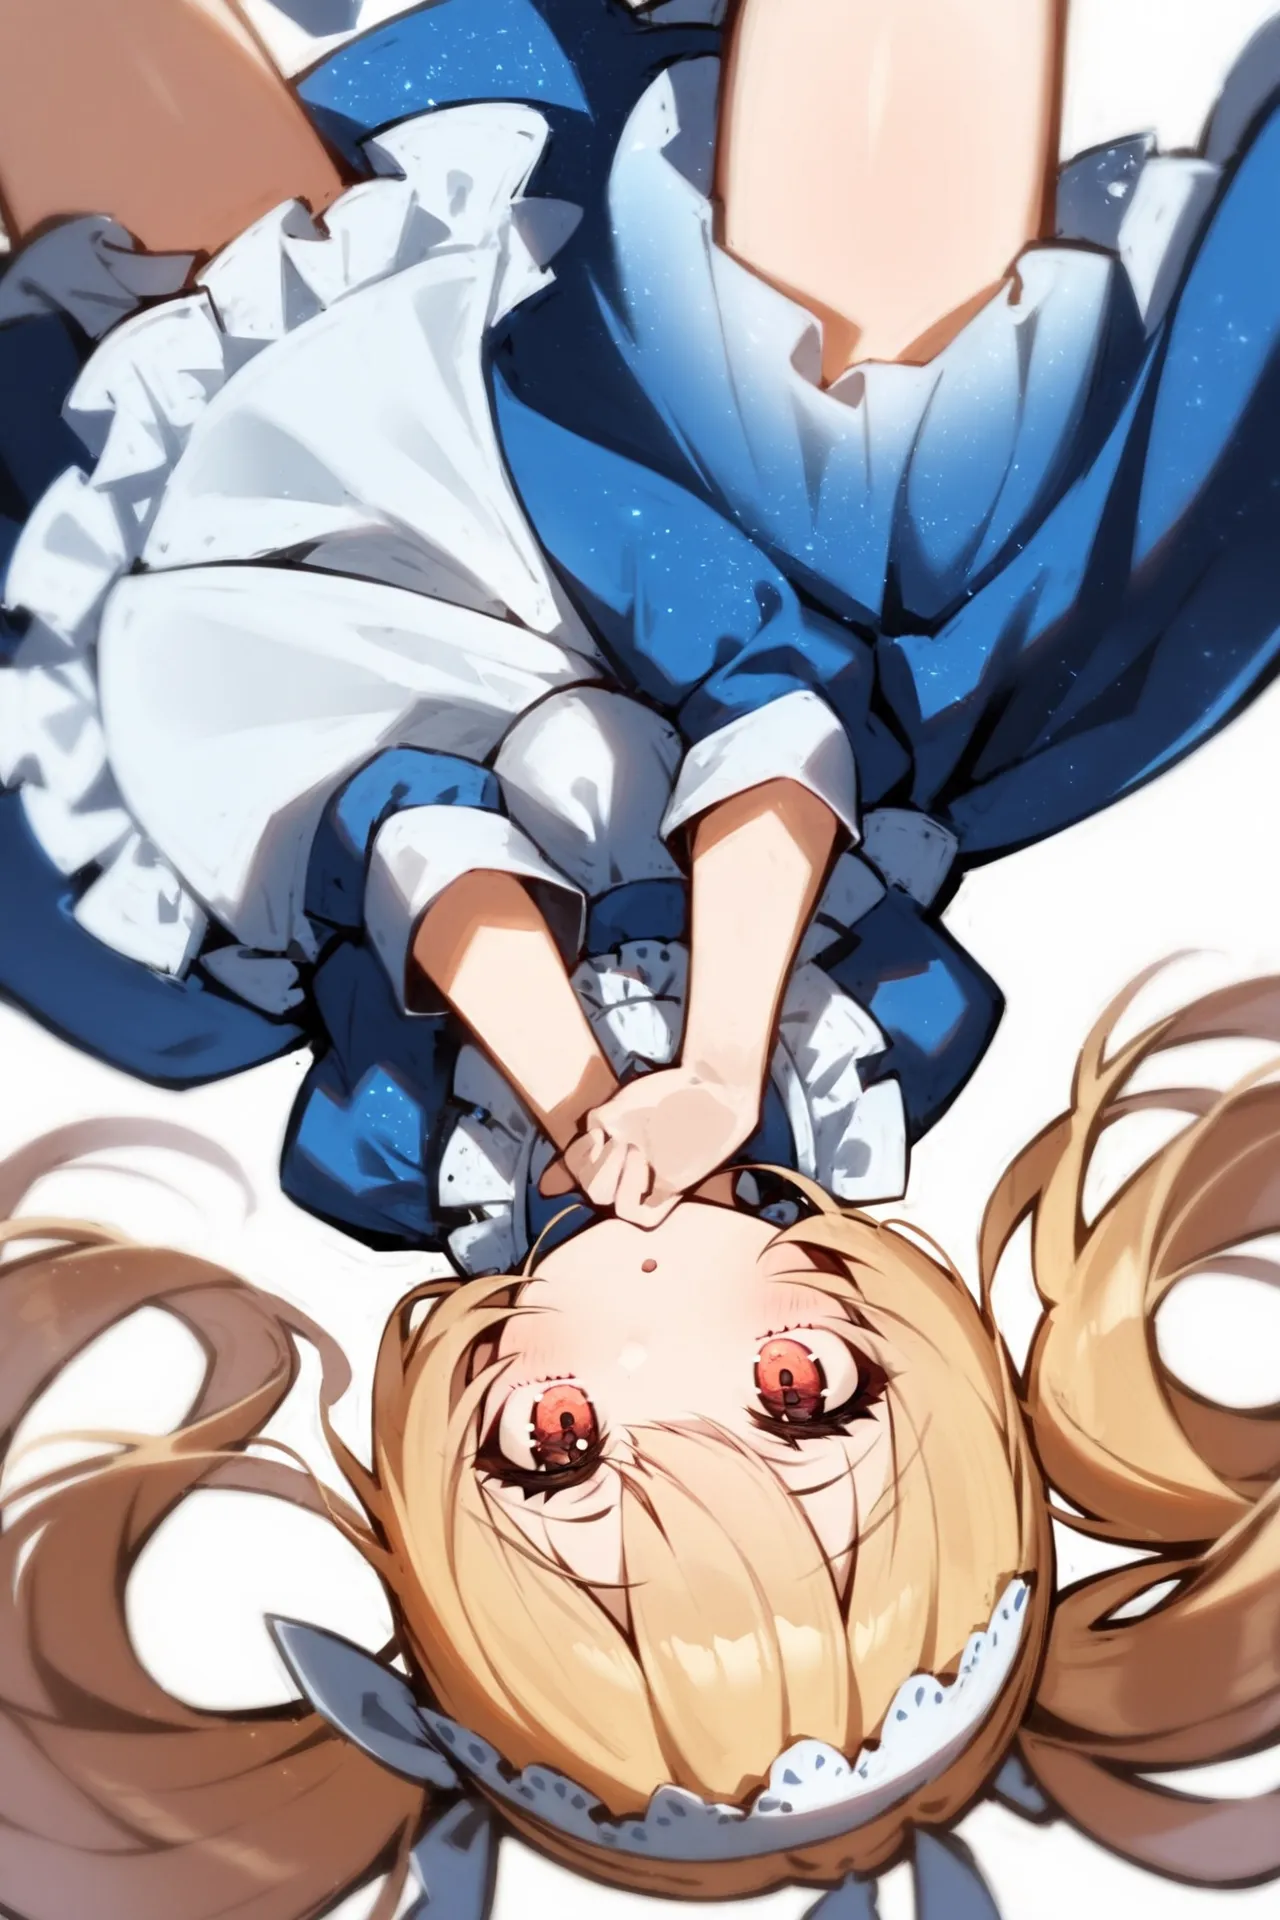 '1girl, upside-down,\nblonde hair, twintails, blue dress, white apron,\nwhite background,\nAlice in glitterworld\nNegative prompt: (worst quality, low quality:1.4), nsfw\nSteps: 35, Sampler: DPM++ 2M SDE Karras, CFG scale: 7, Seed: 1, Size: 640x960, Model hash: 642b08ca49, Model: ConfusionXL2.0_fp16_vae, VAE hash: 63aeecb90f, VAE: sdxl_vae_0.9.safetensors, Denoising strength: 0.6, Clip skip: 2, Hires upscale: 2, Hires steps: 15, Hires upscaler: ESRGAN_4x, Eta: 0.68, Version: v1.7.0'